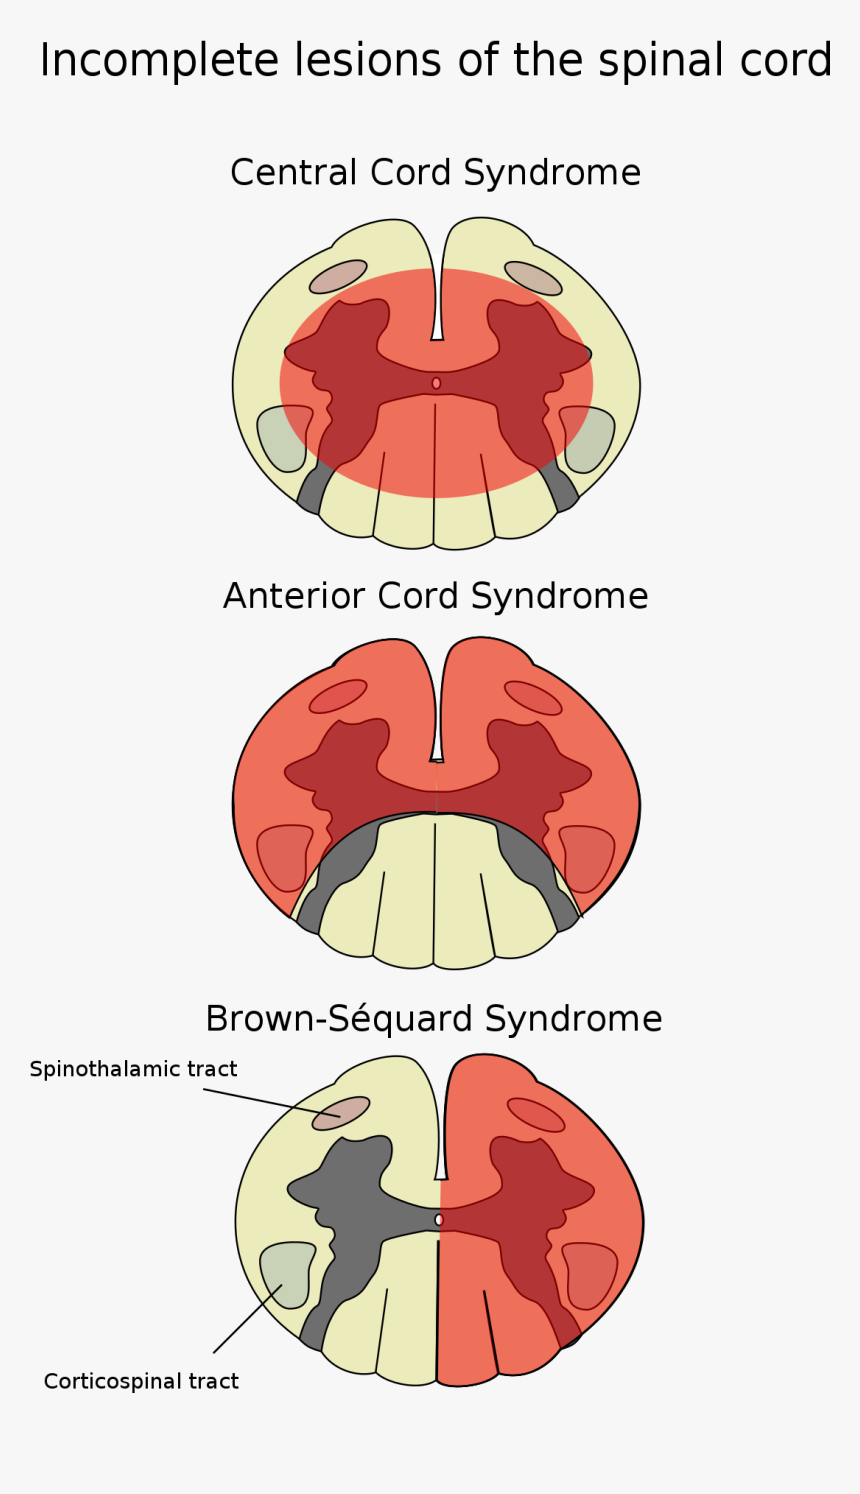 File - Cord-en - Incomplete Spinal Cord Lesions, HD Png Download, Free Download